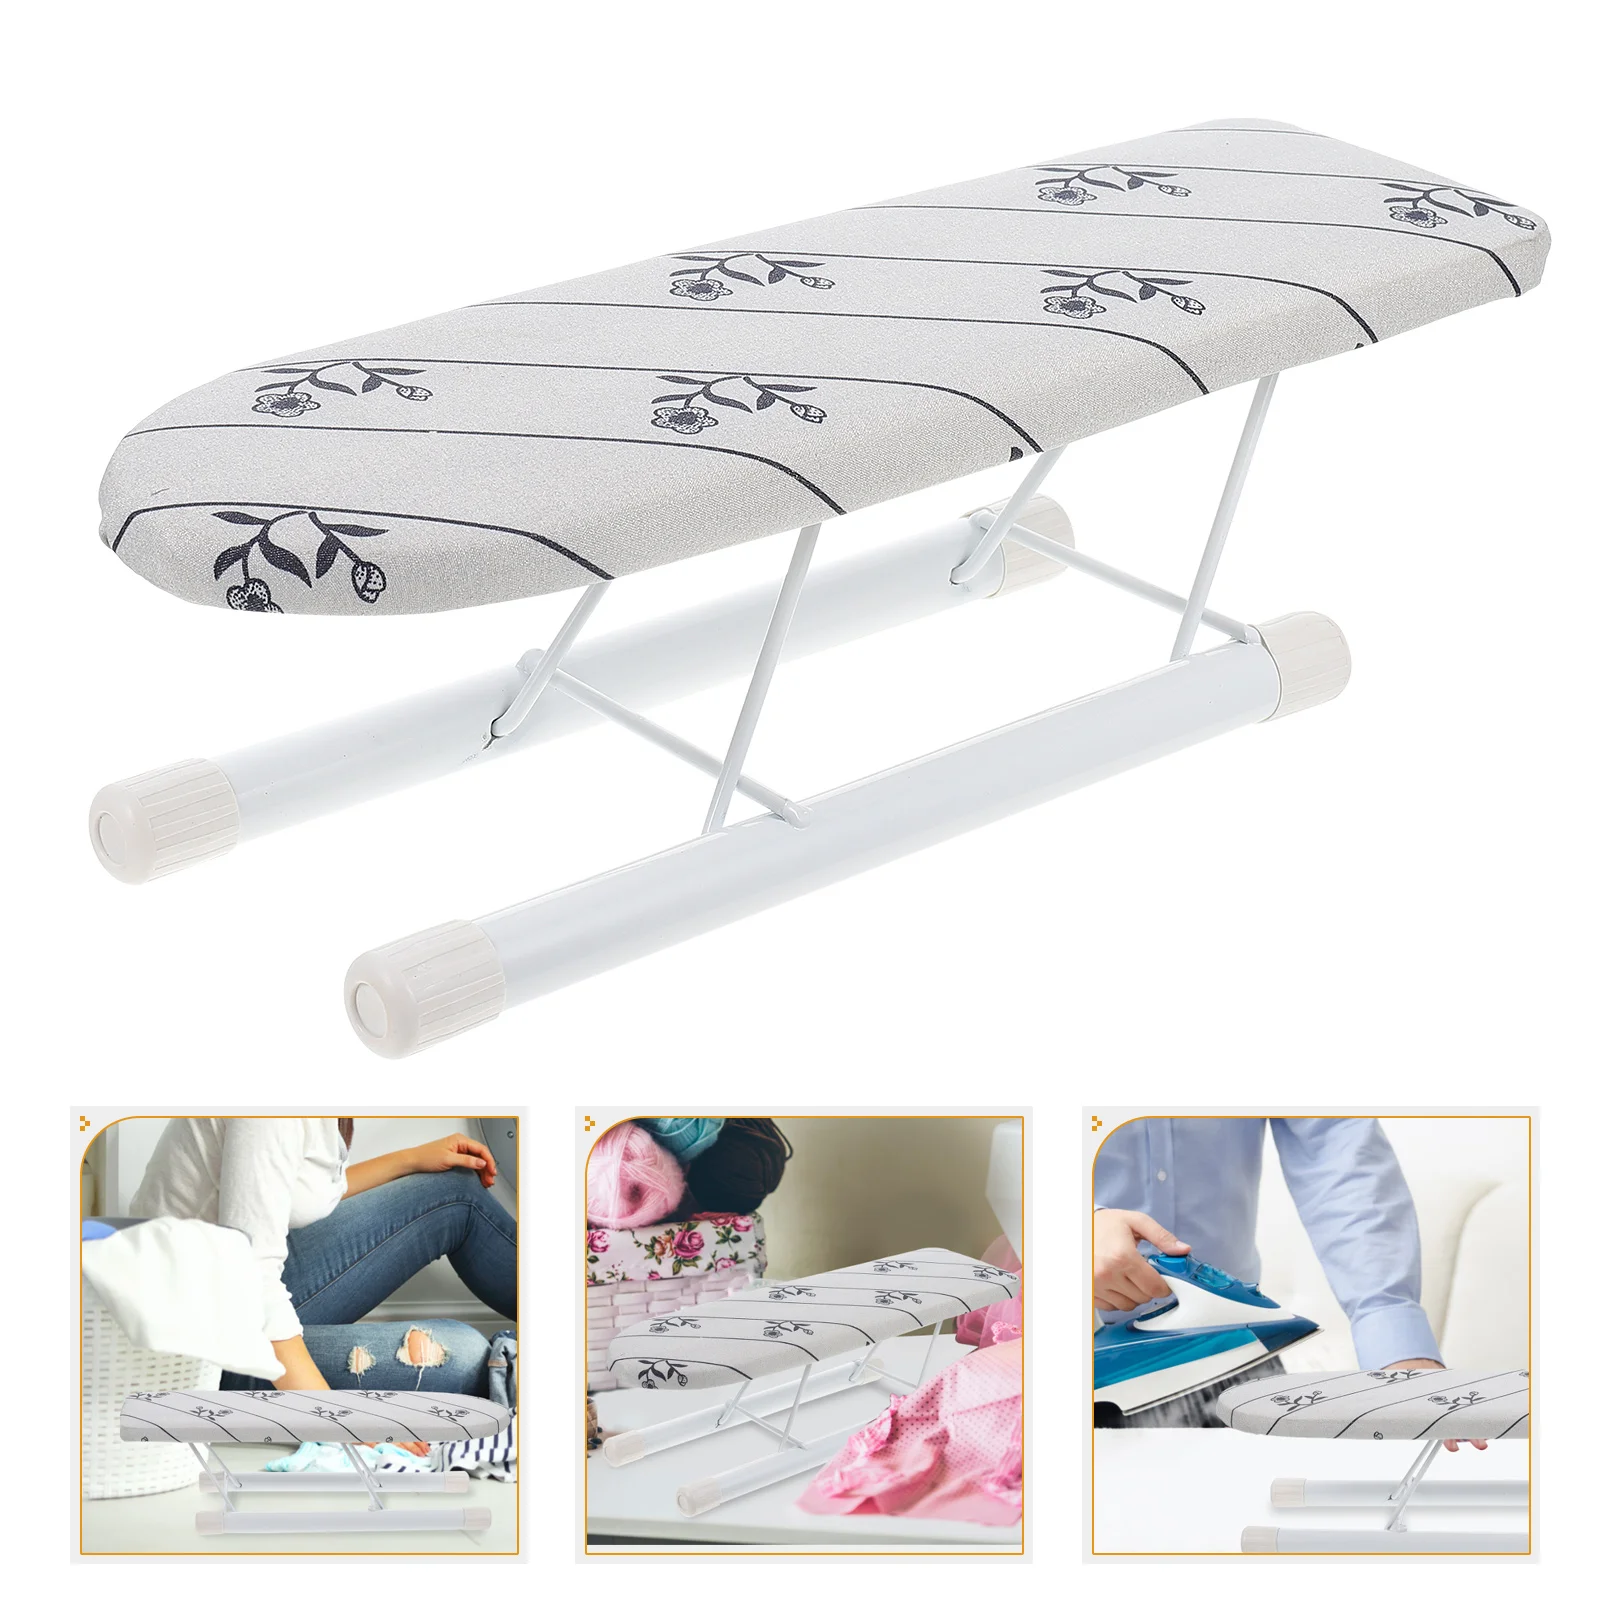 

Board Ironing Iron Mini Tabletoptable Foldable Clothes Portable Folding Household Padded Sleeve Pressing Steamerclothing Mat